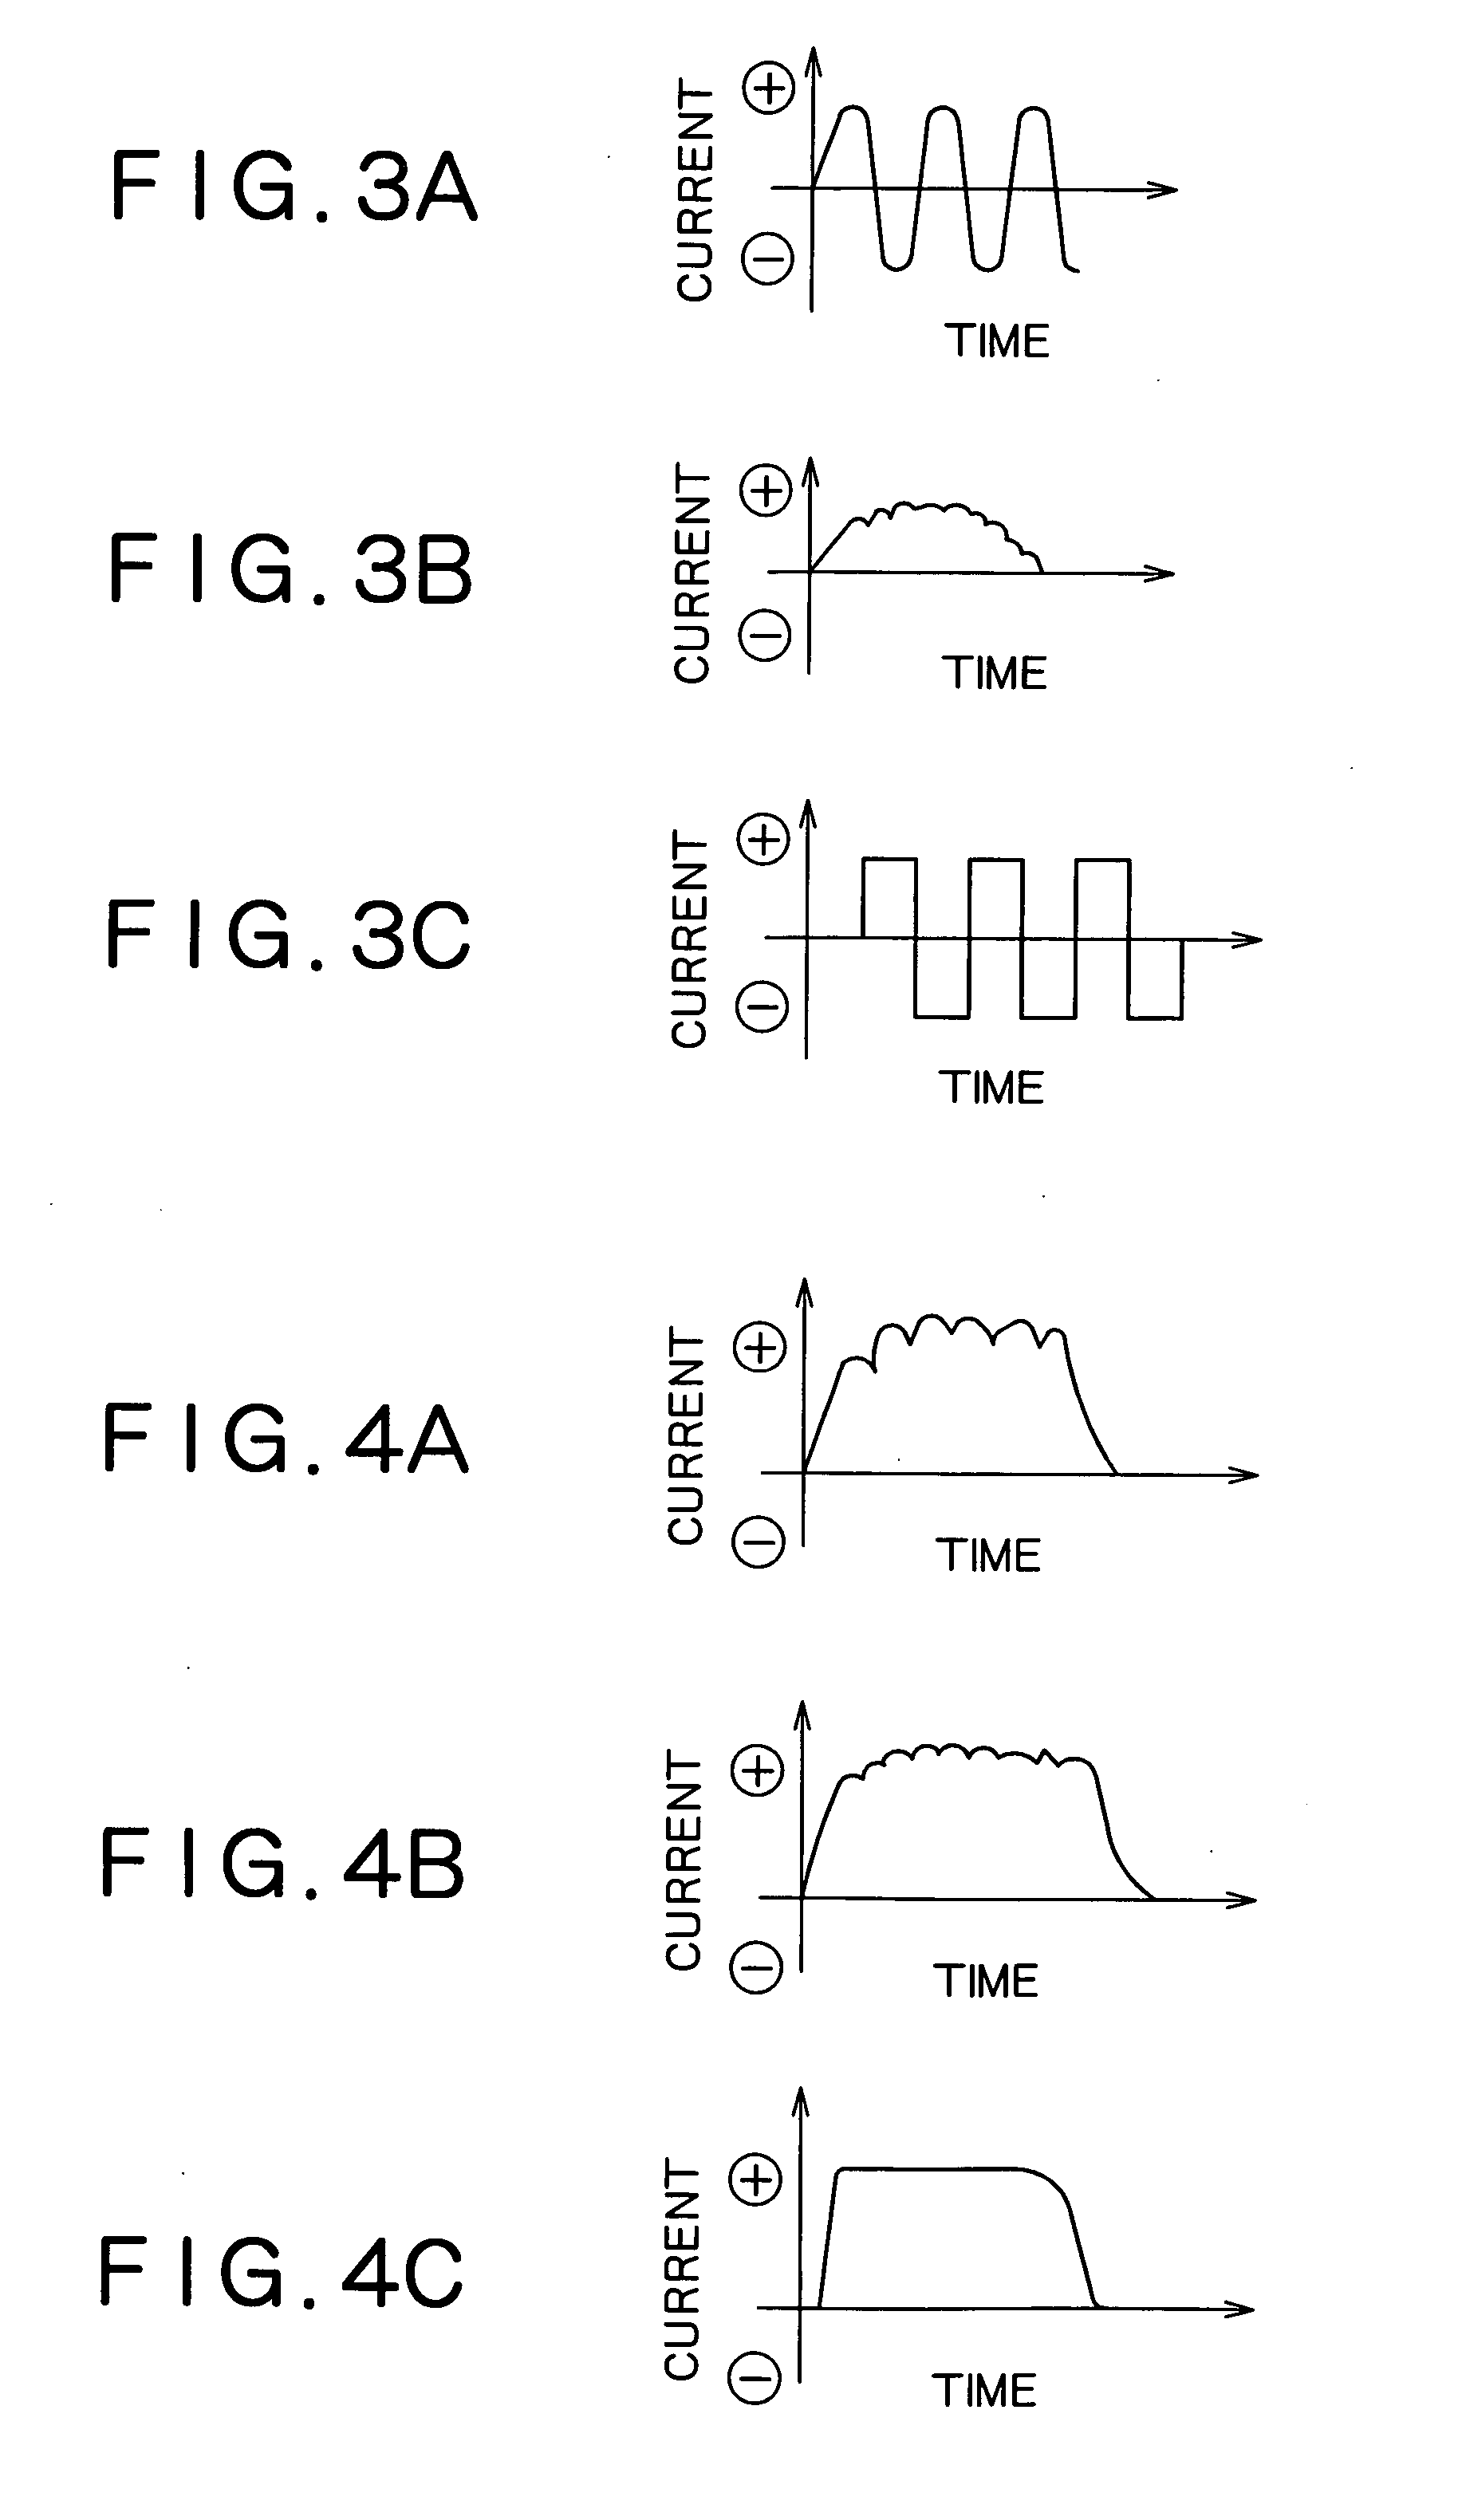 Weldment of different materials and resistance spot welding method